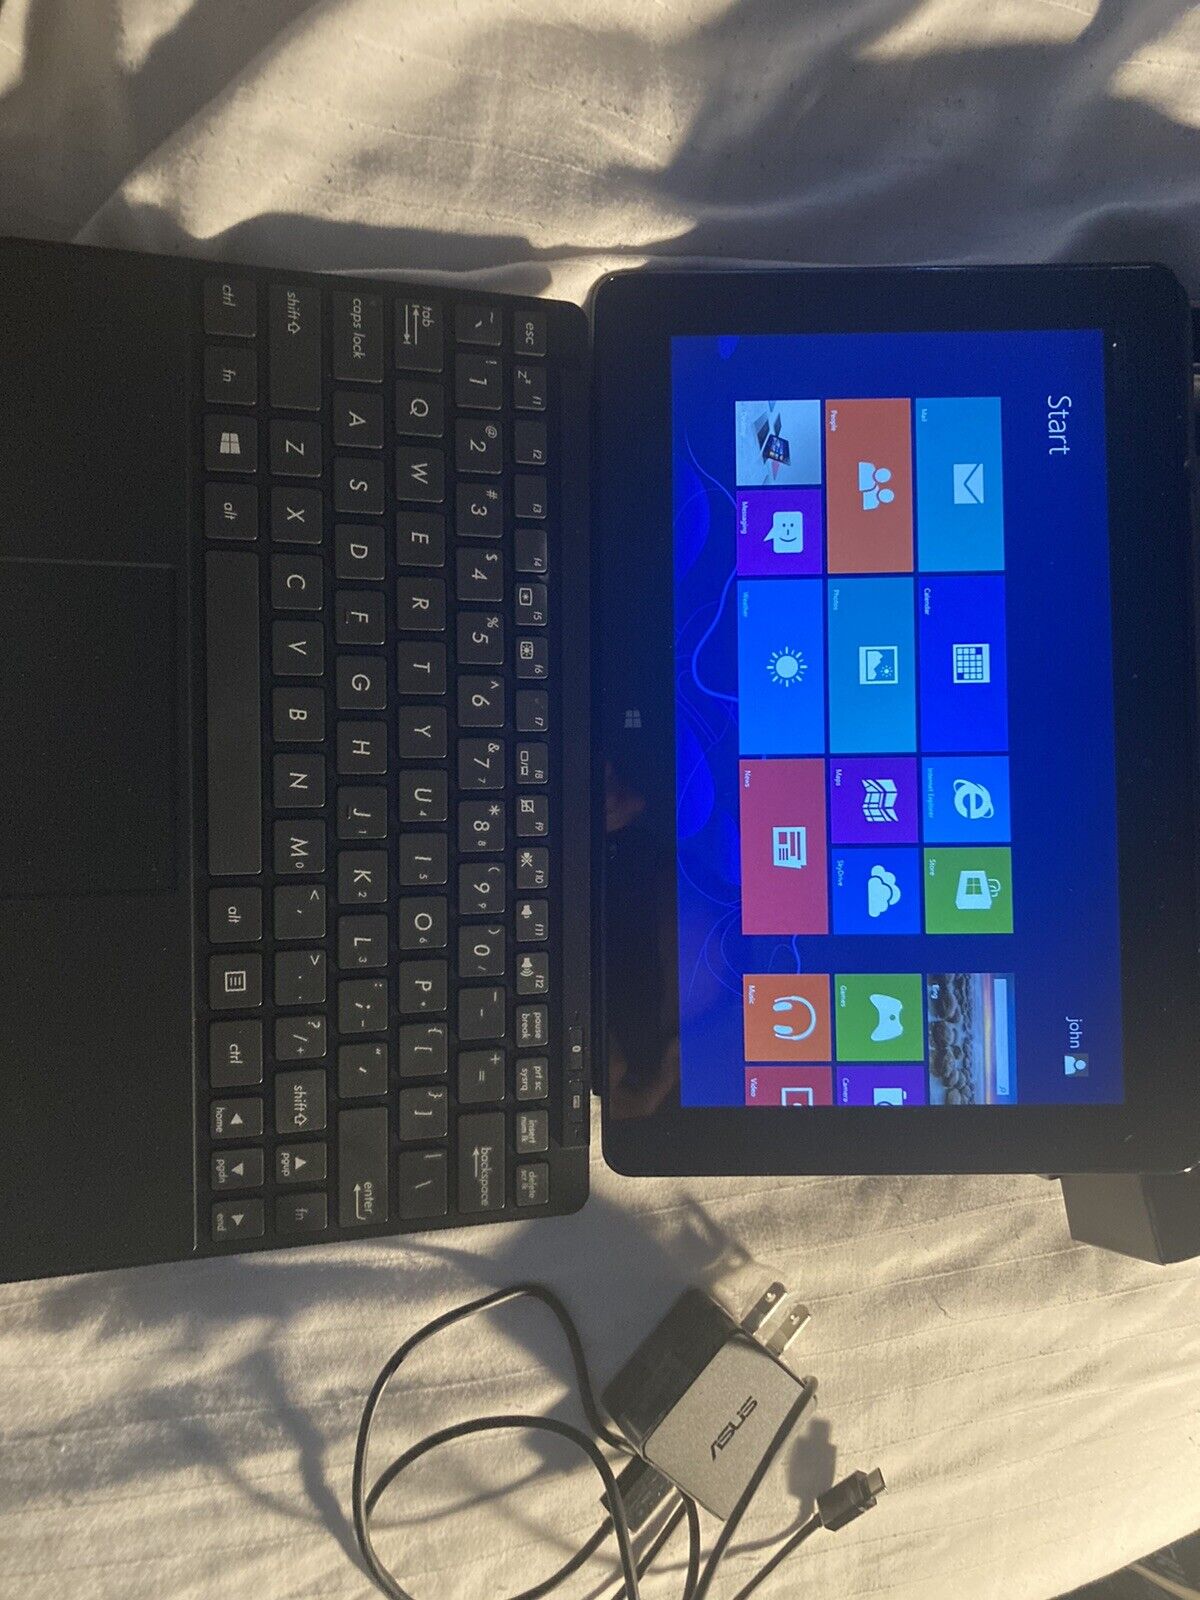 ASUS VivoTab Smart Tablet Computer Windows 8 With Keyboard And Charger And Case